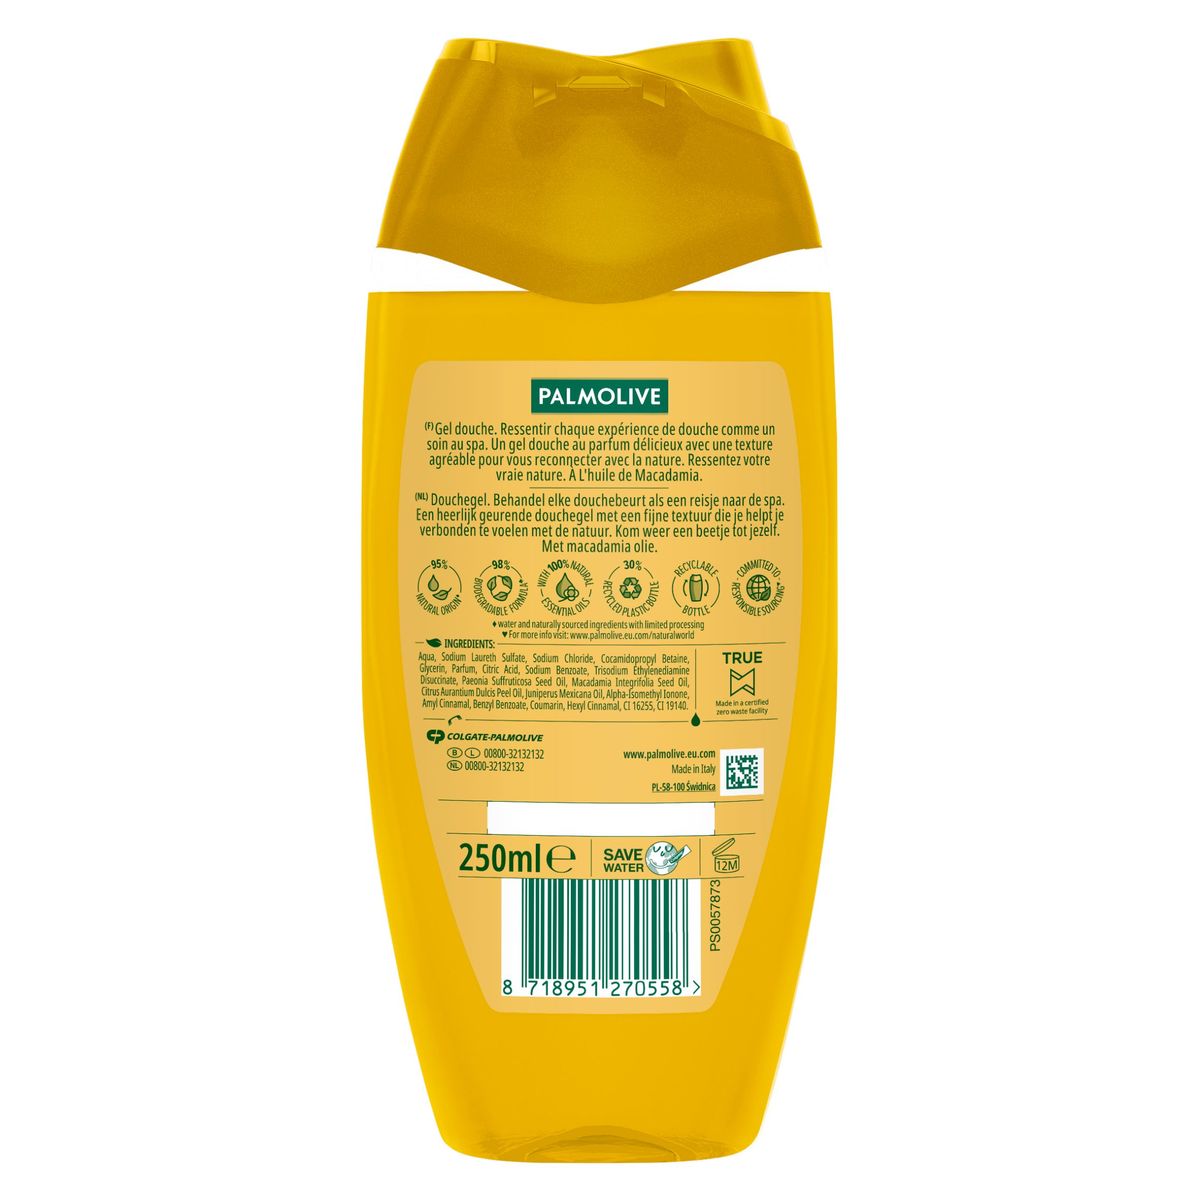 Palmolive Thermal Pampering Oil douchegel 250 ml